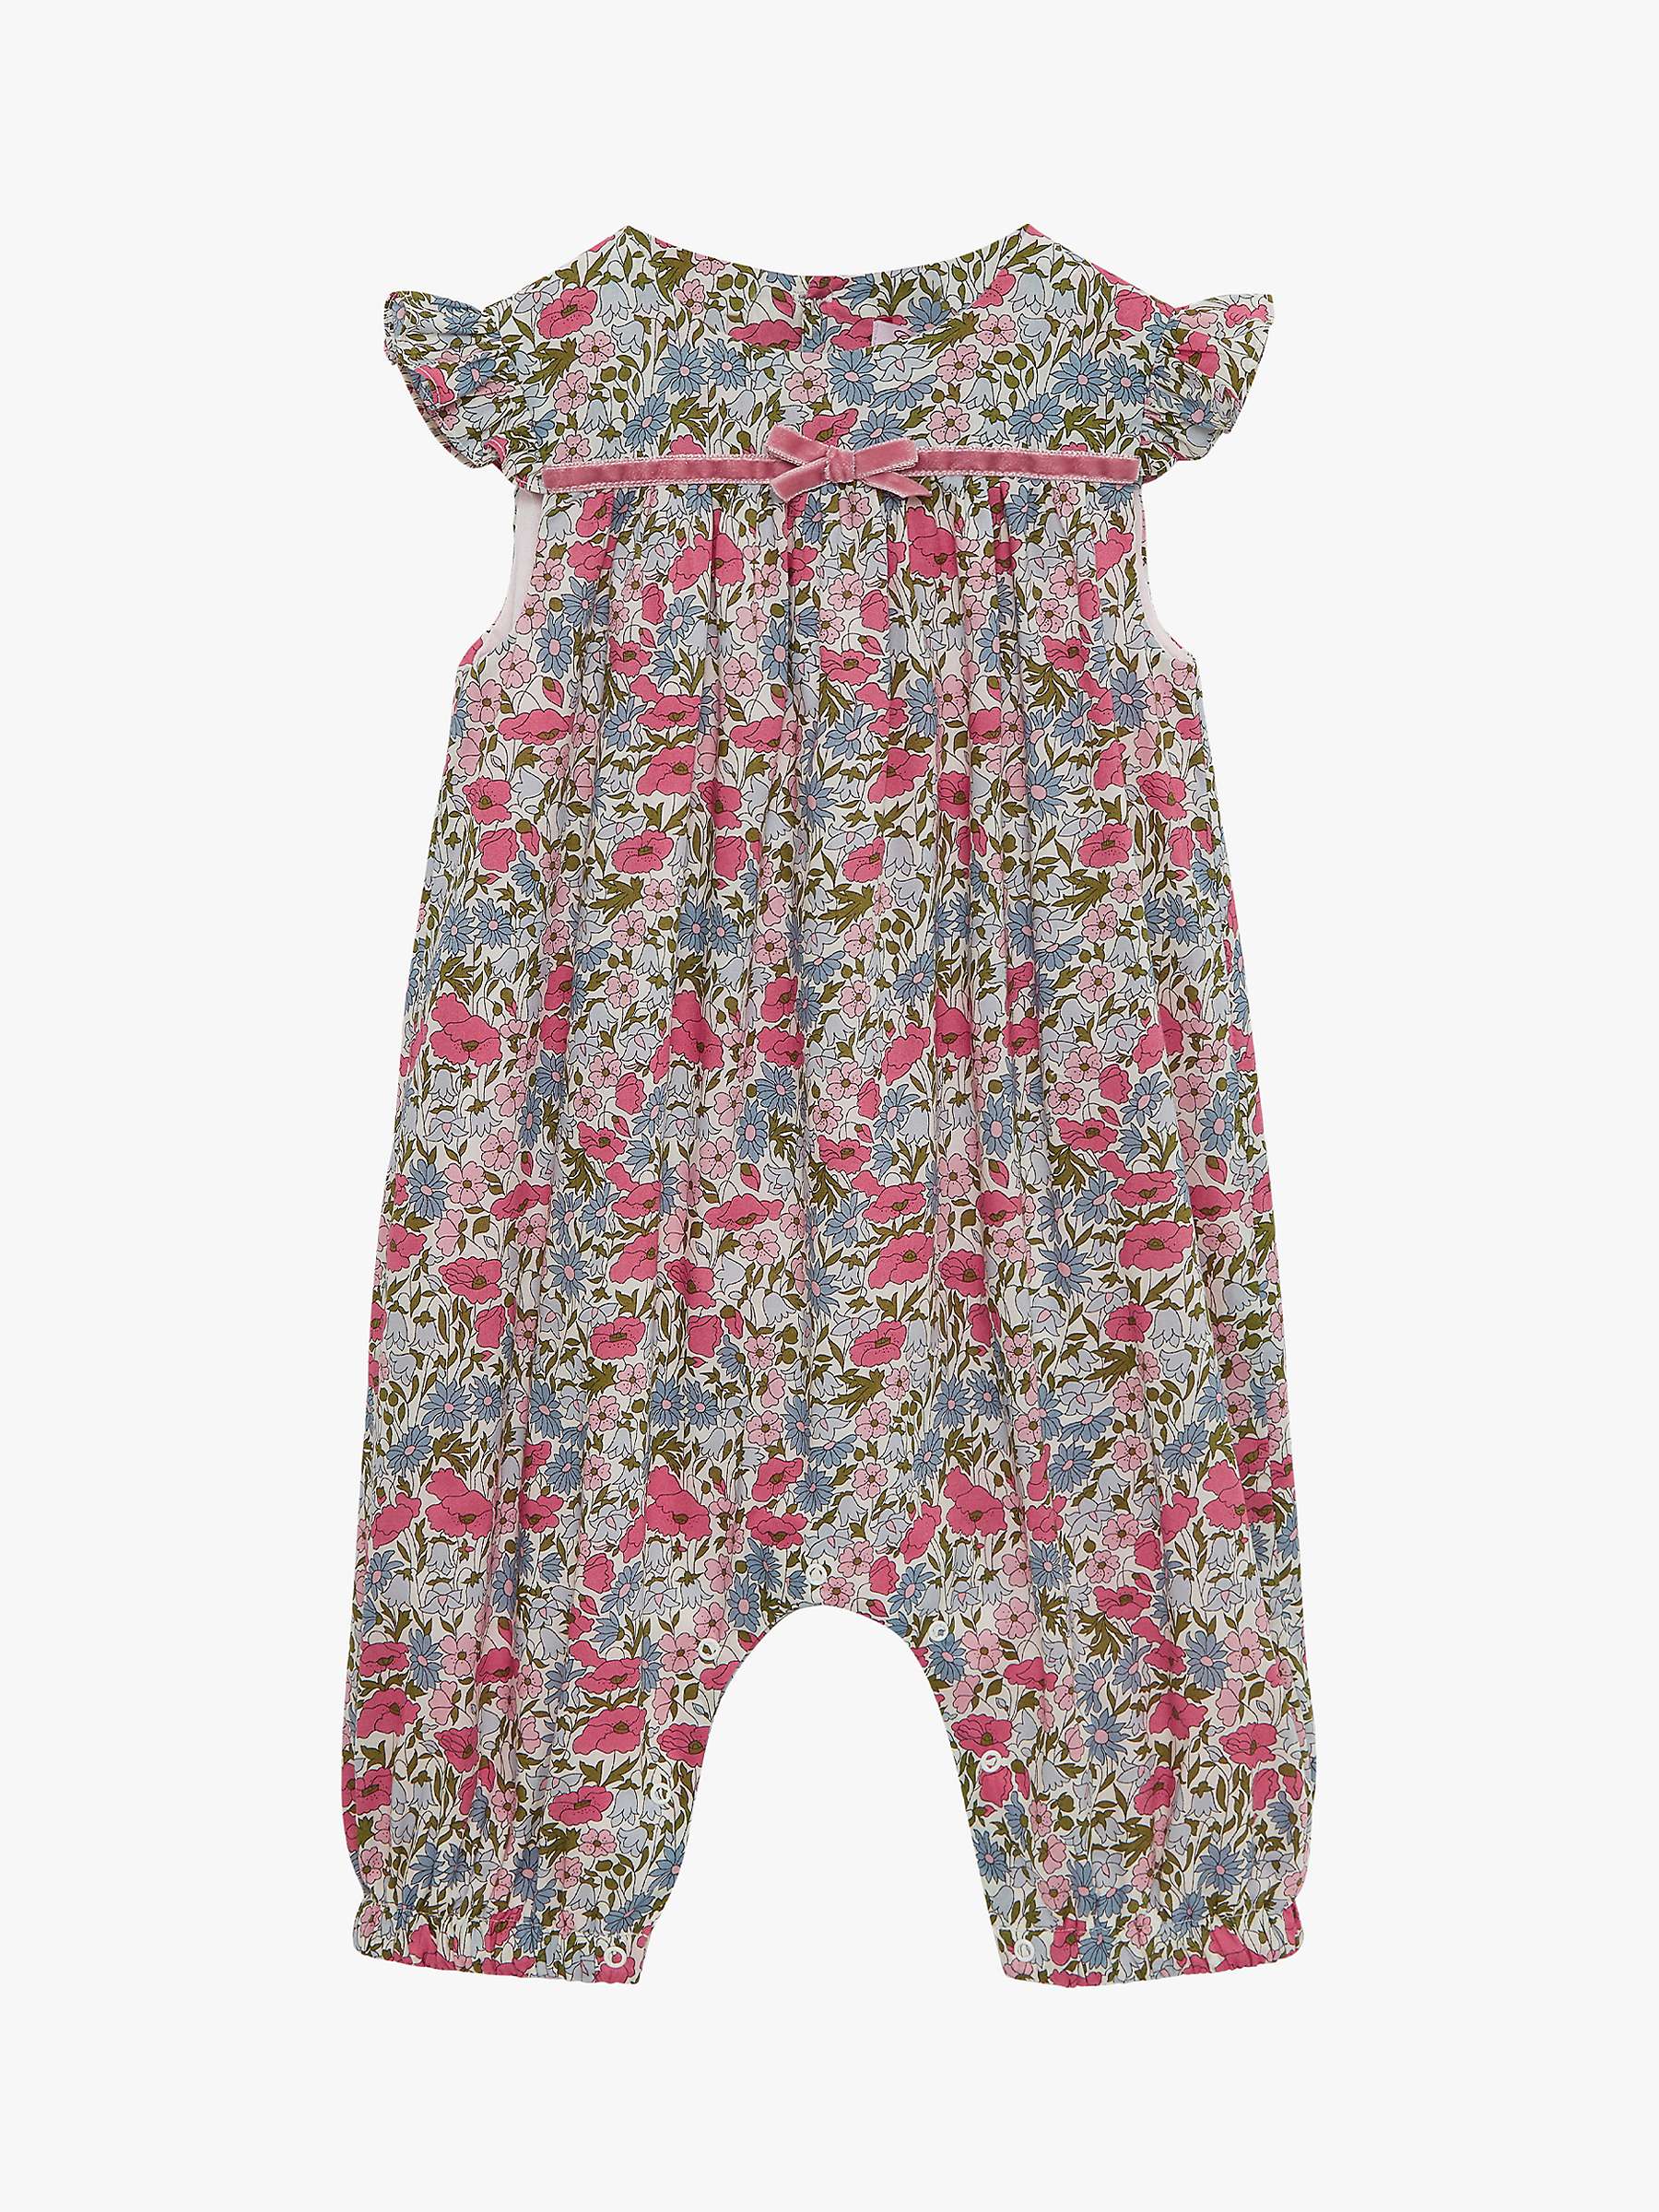 Buy Trotters Lily Rose Baby Poppy Print Romper, Pink/Multi Online at johnlewis.com